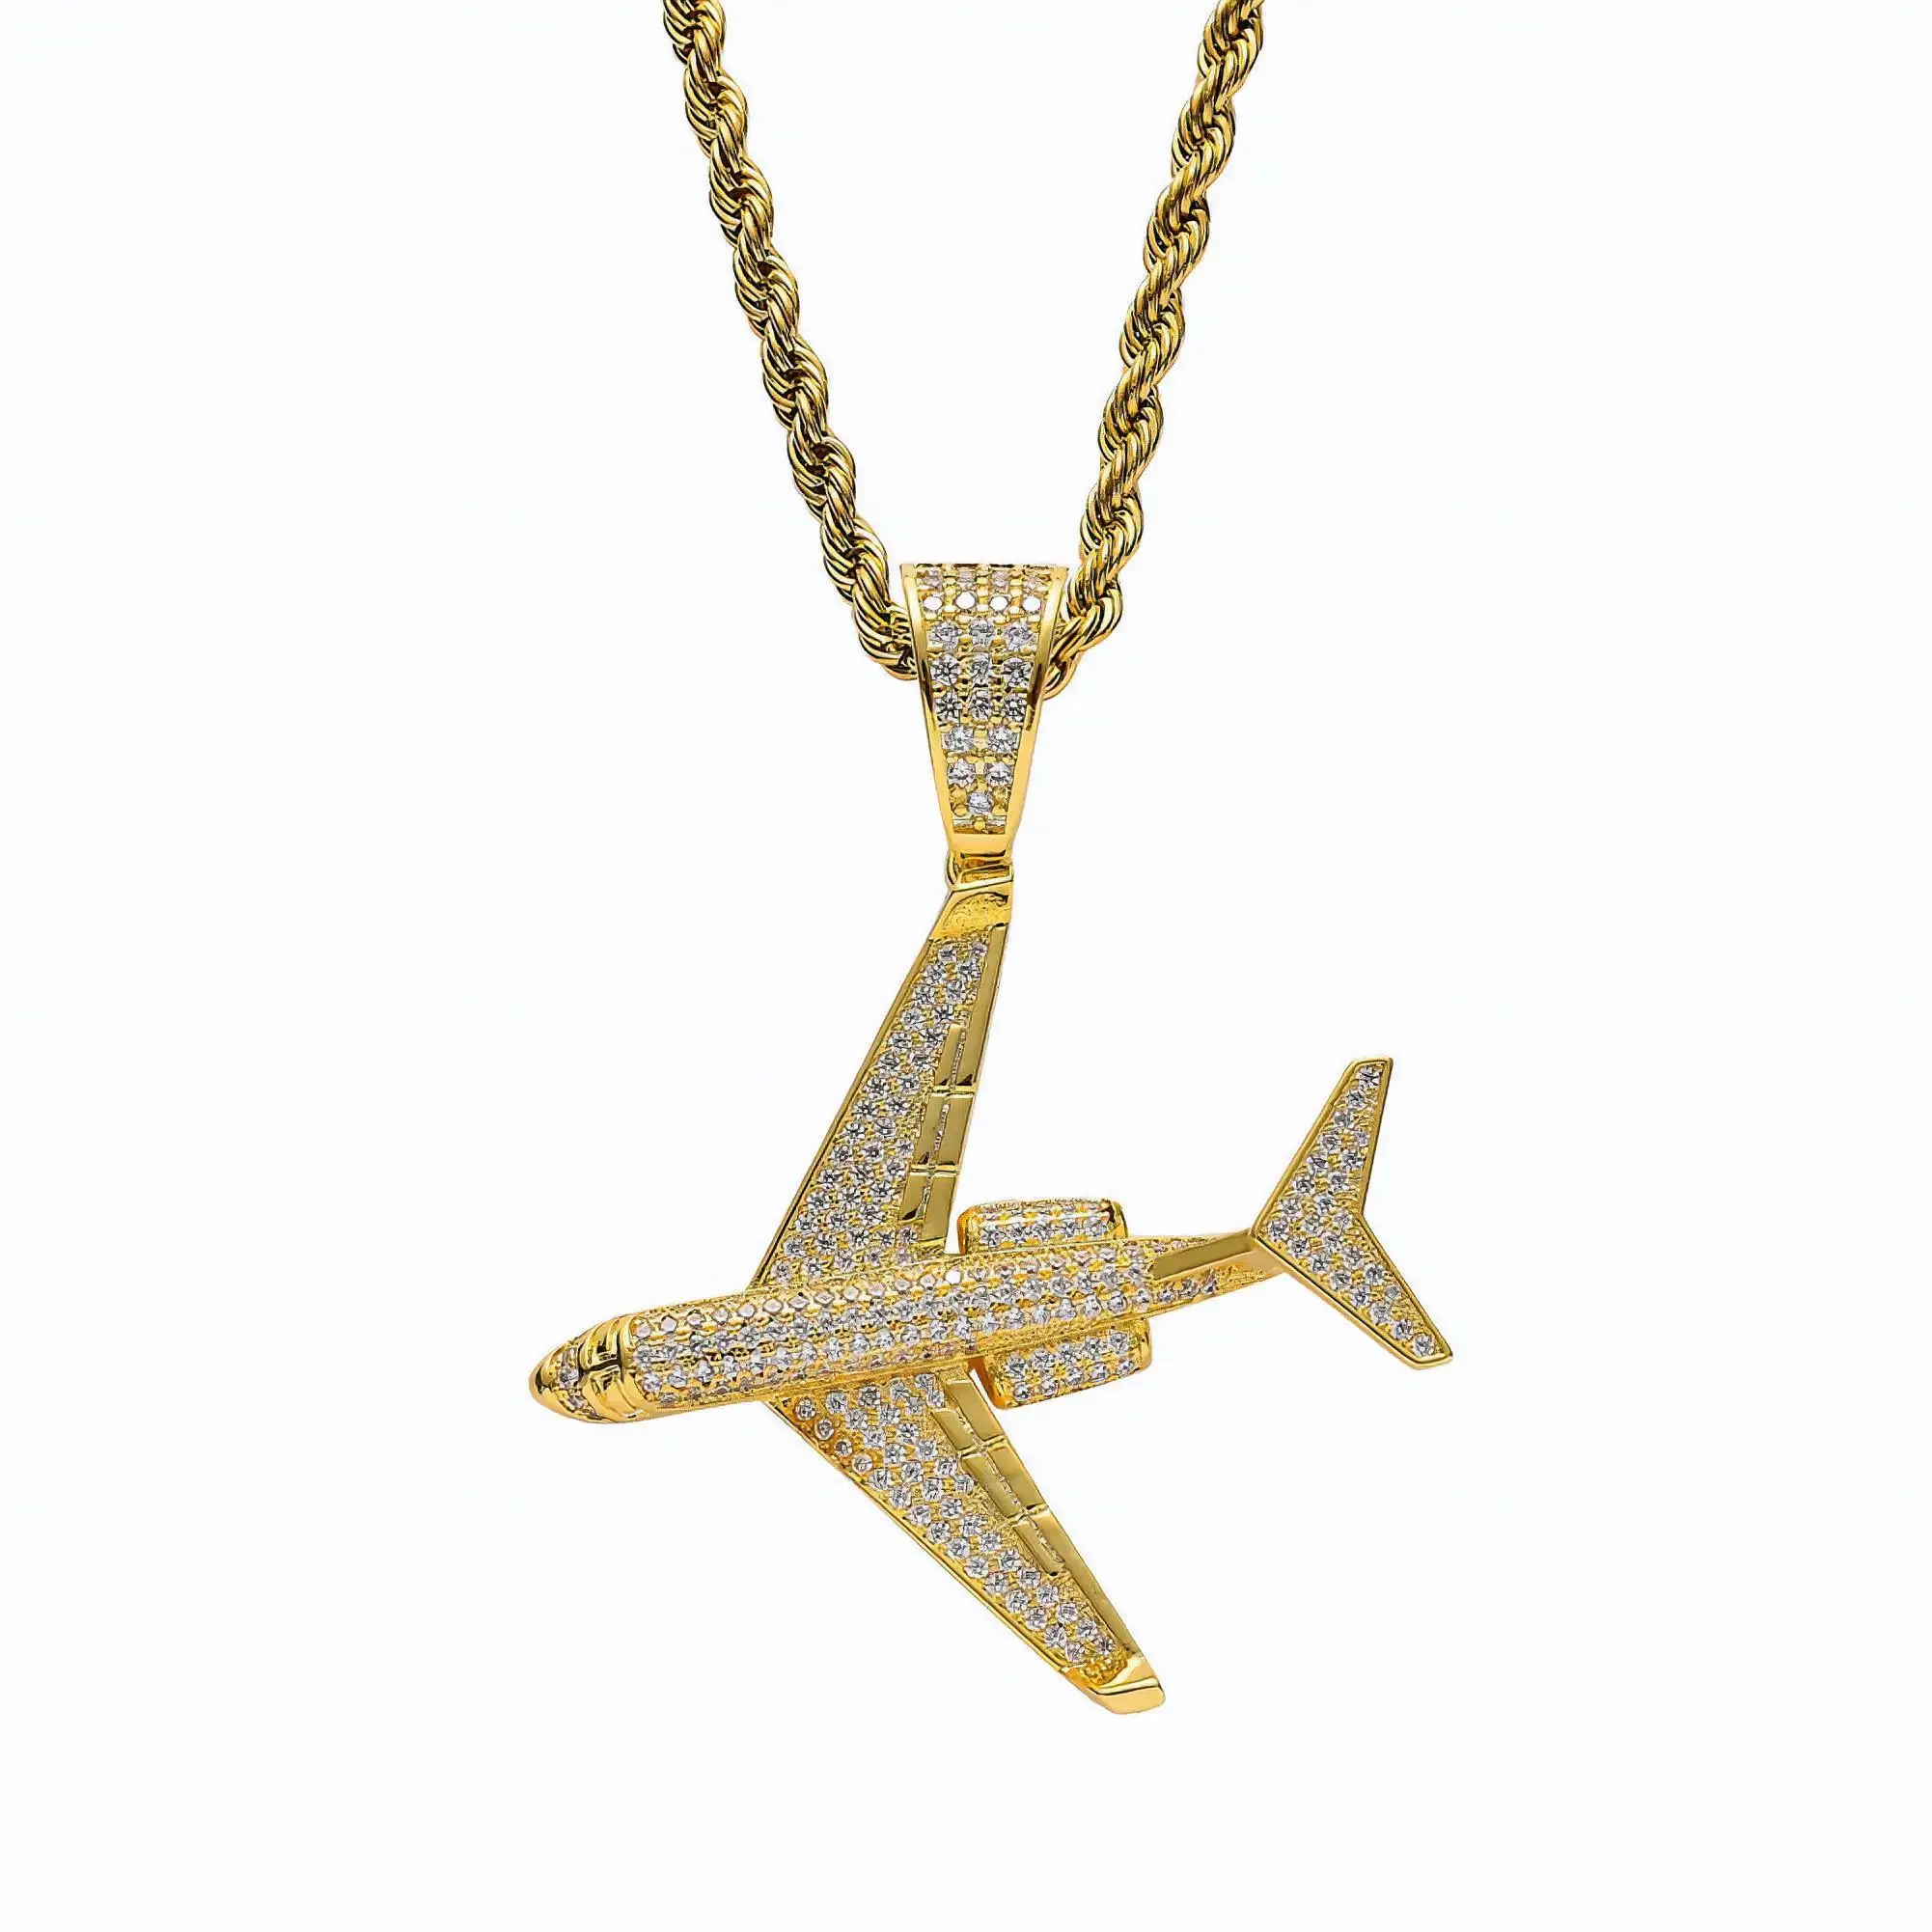 DUYIZHAO New Iced Out Pendant Hip Hop Jewelry Retro Stereo Plane Full Zirconium Pendants For Necklace Gold Plated Pendants